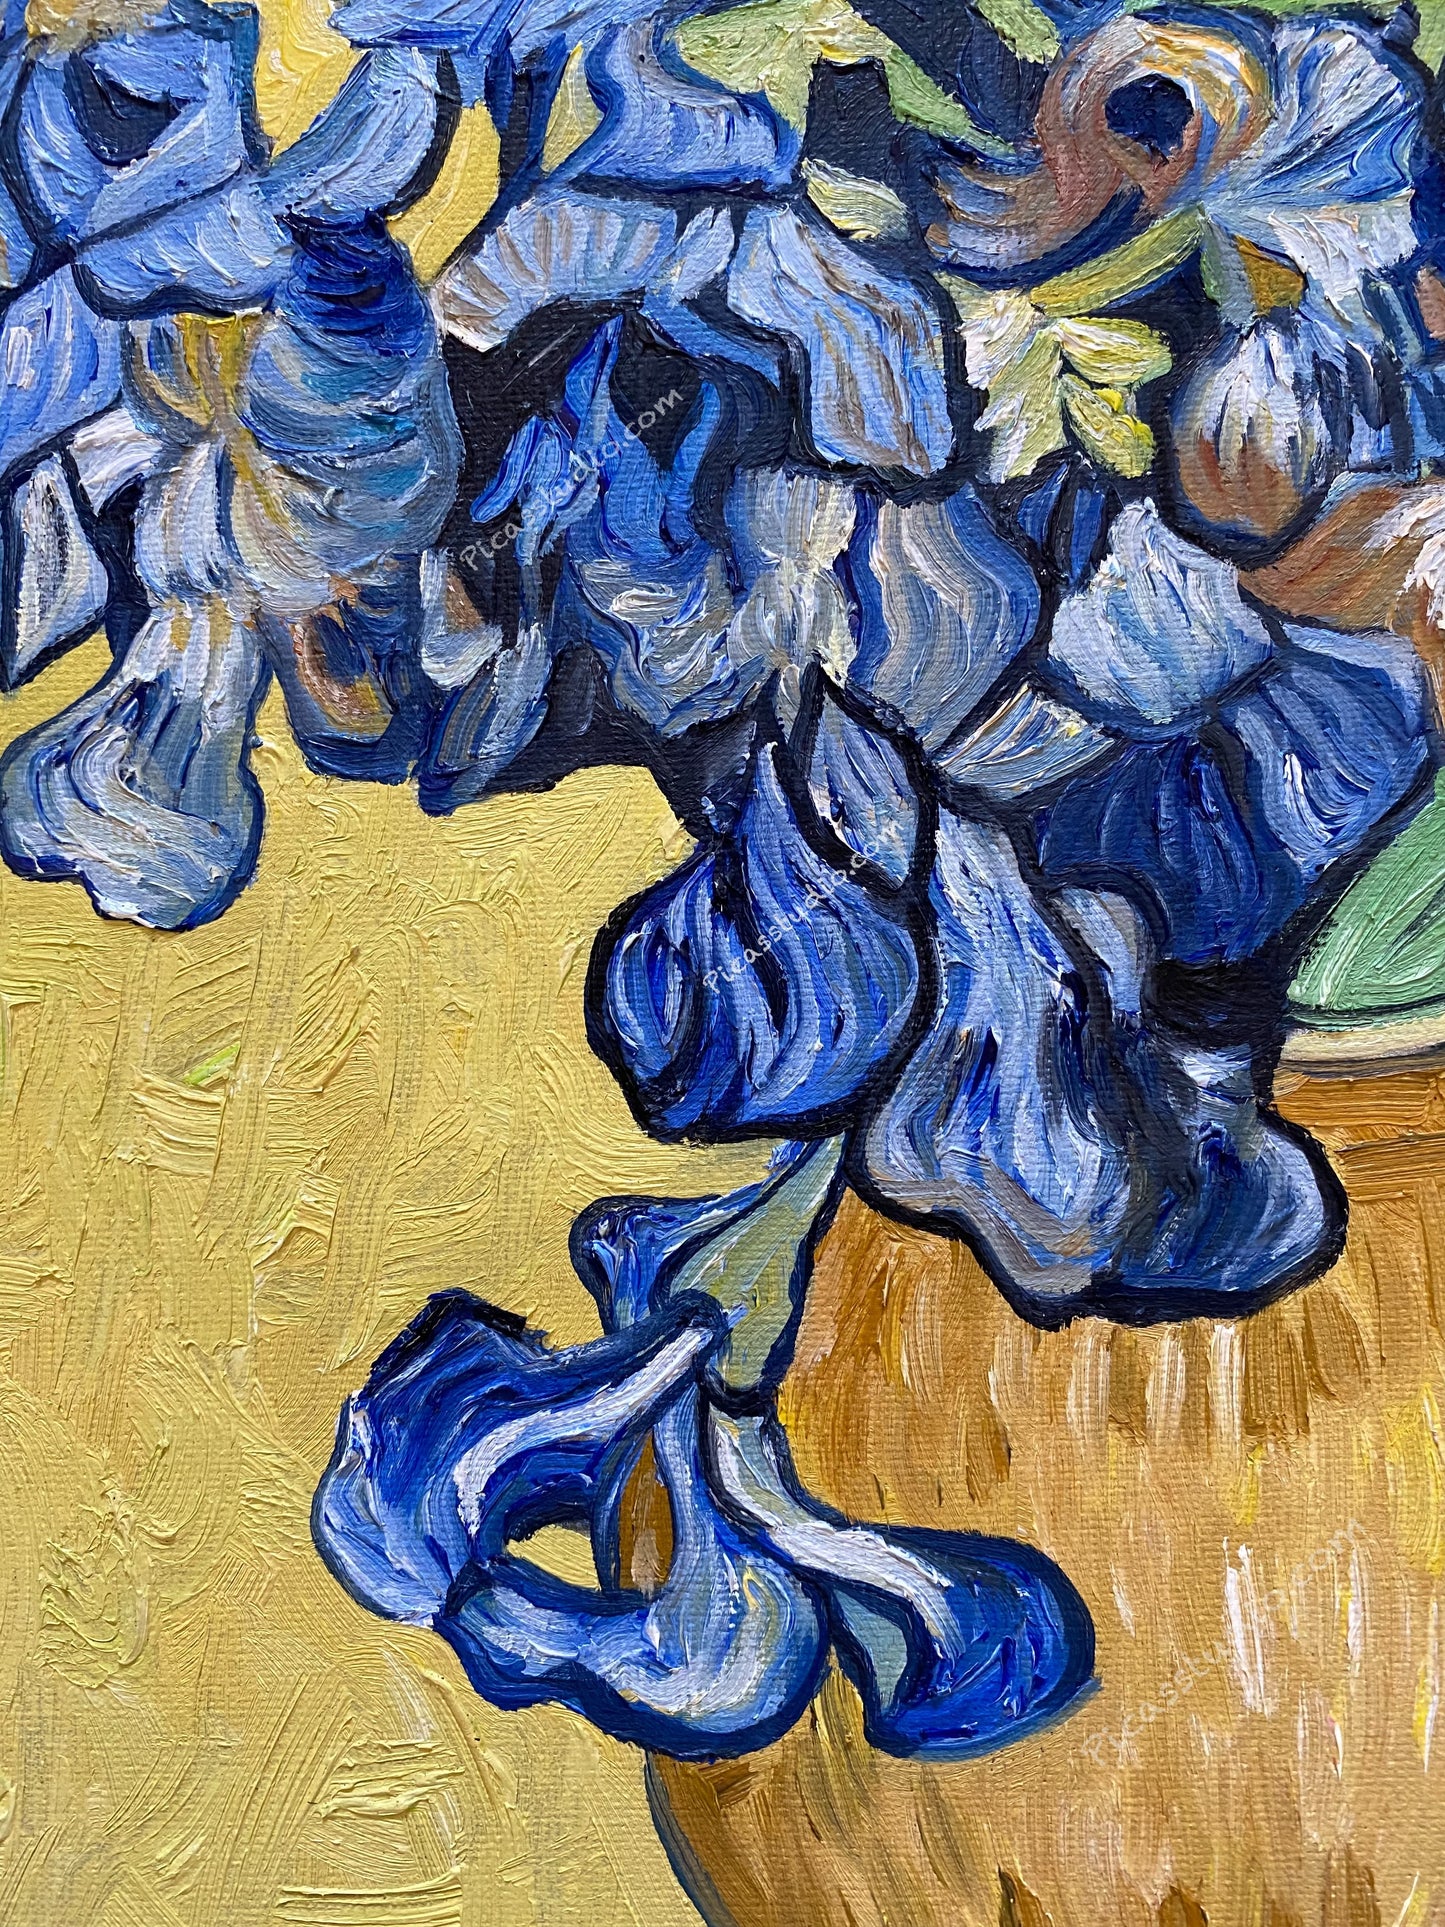 Vincent van Gogh Oil Painting Irises Hand Painted Art on Canvas Wall Decor Unframed